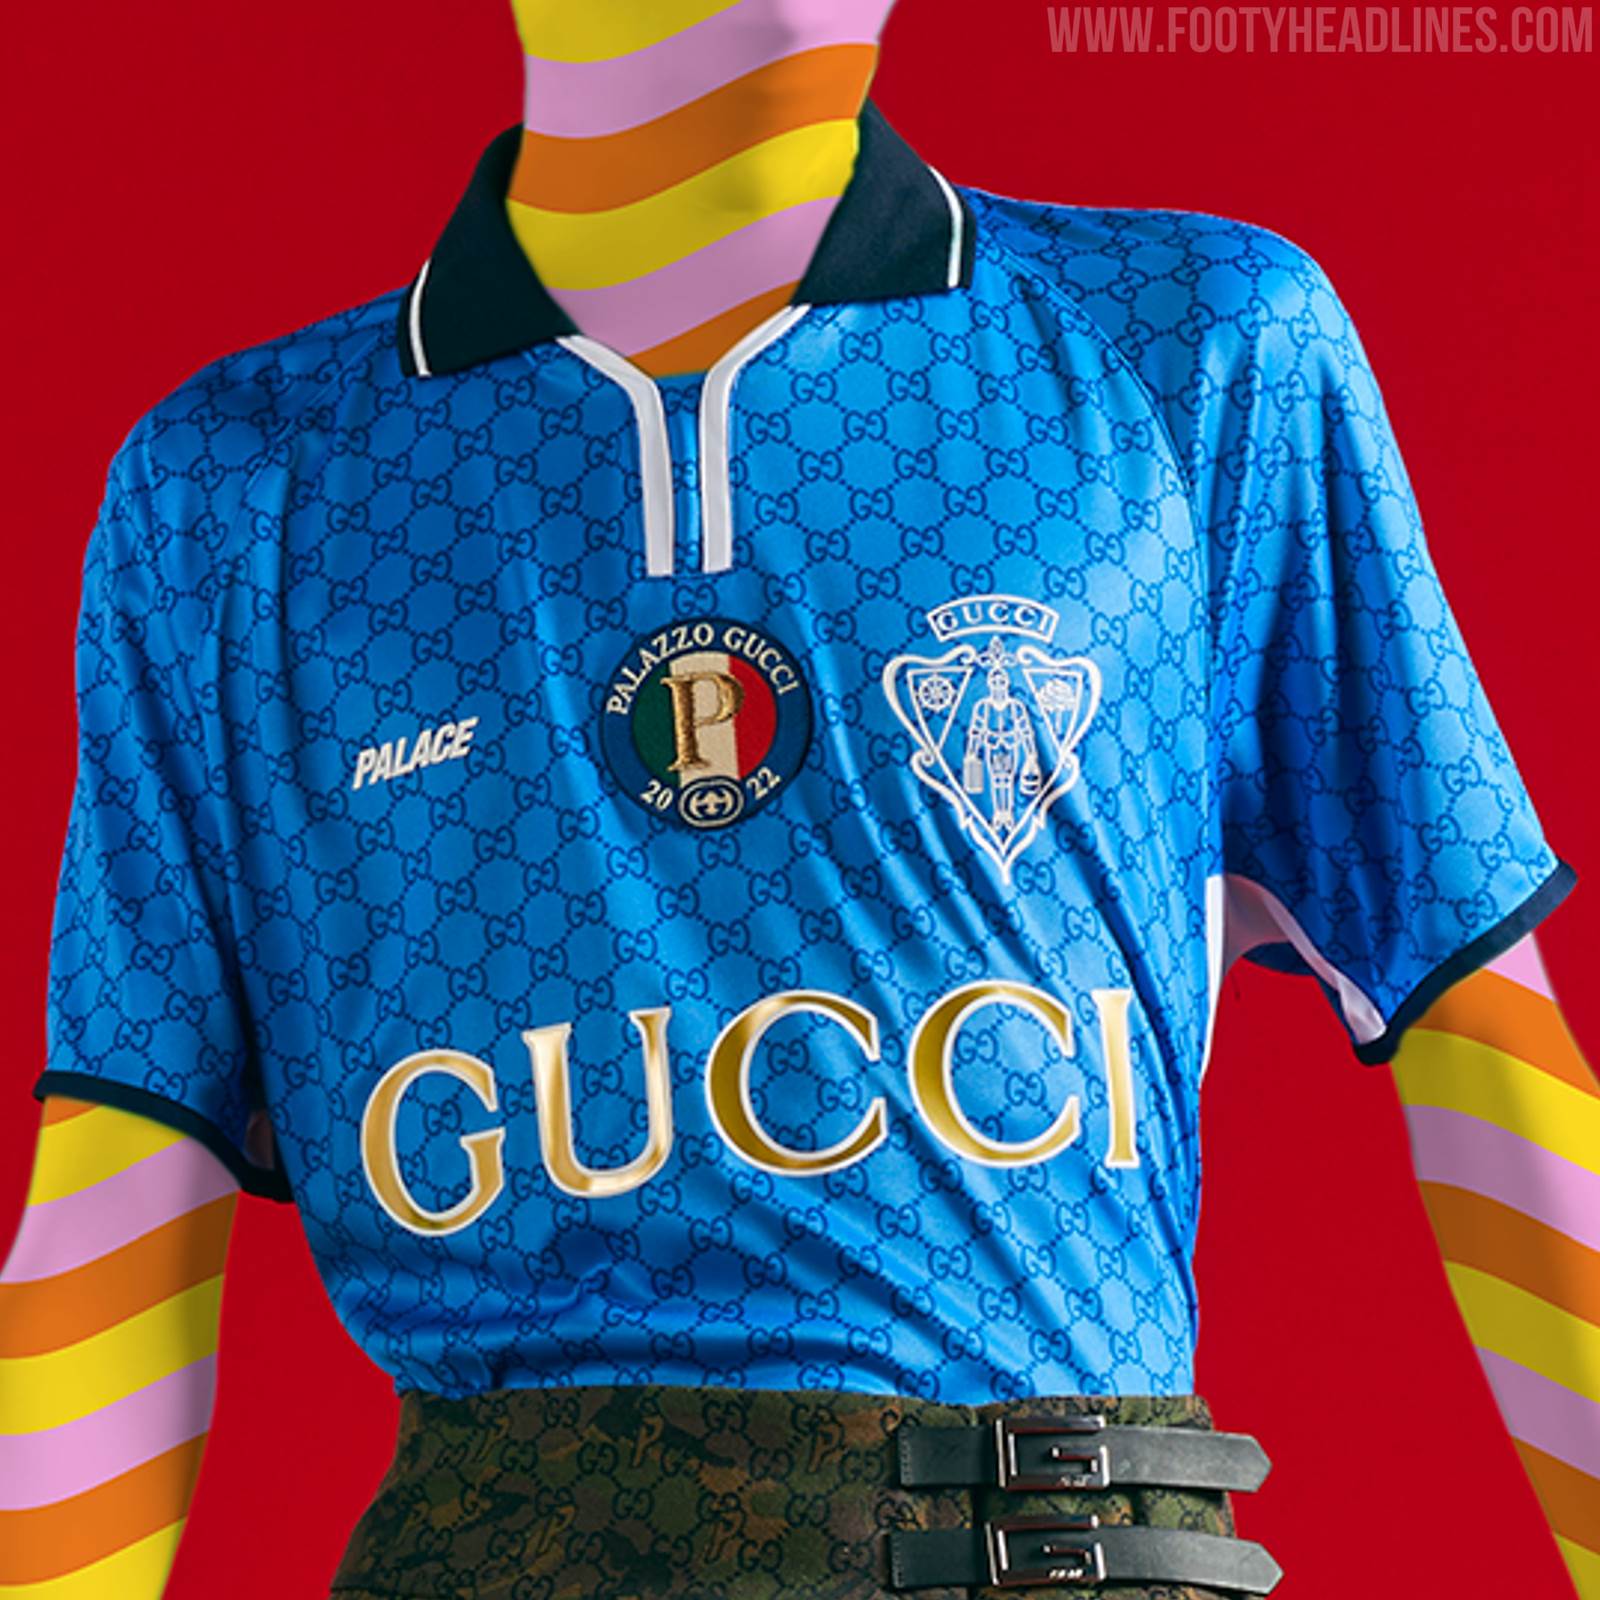 3 Gucci x Palace Football Kits Released - Inspired By Chelsea, Italy &  Strawberry Kit - Footy Headlines